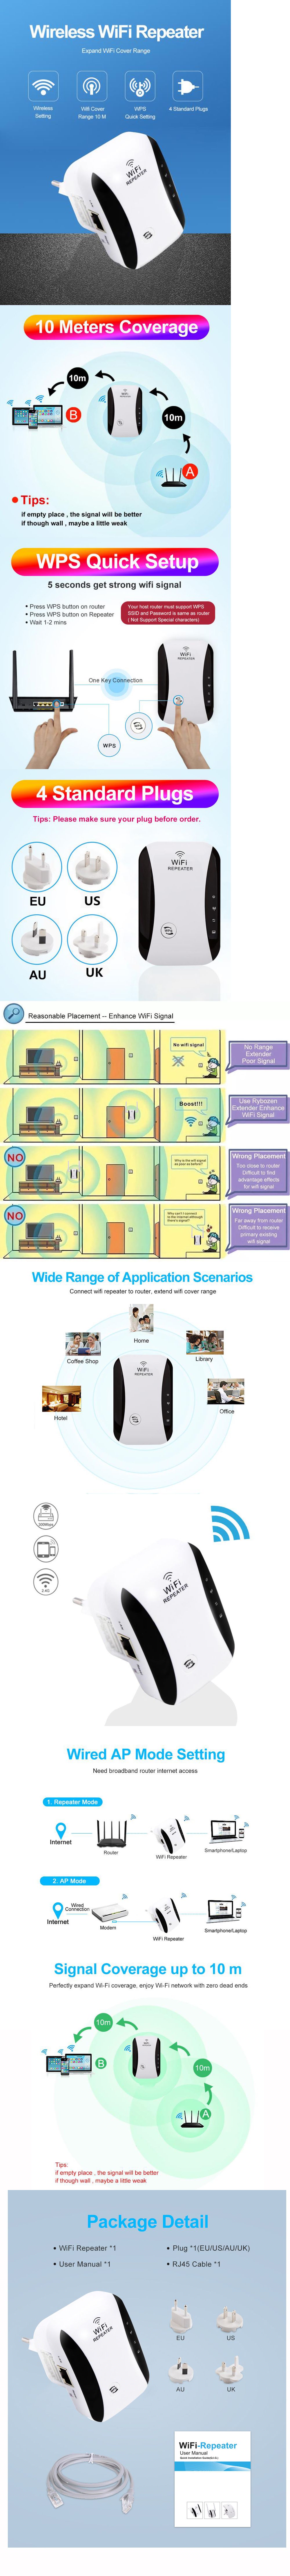 Wireless-WiFi-Repeater-300Mbps-WiFi-Extender-Expand-WiFi-Range-WPS-24GHz-Wired-AP-1742873